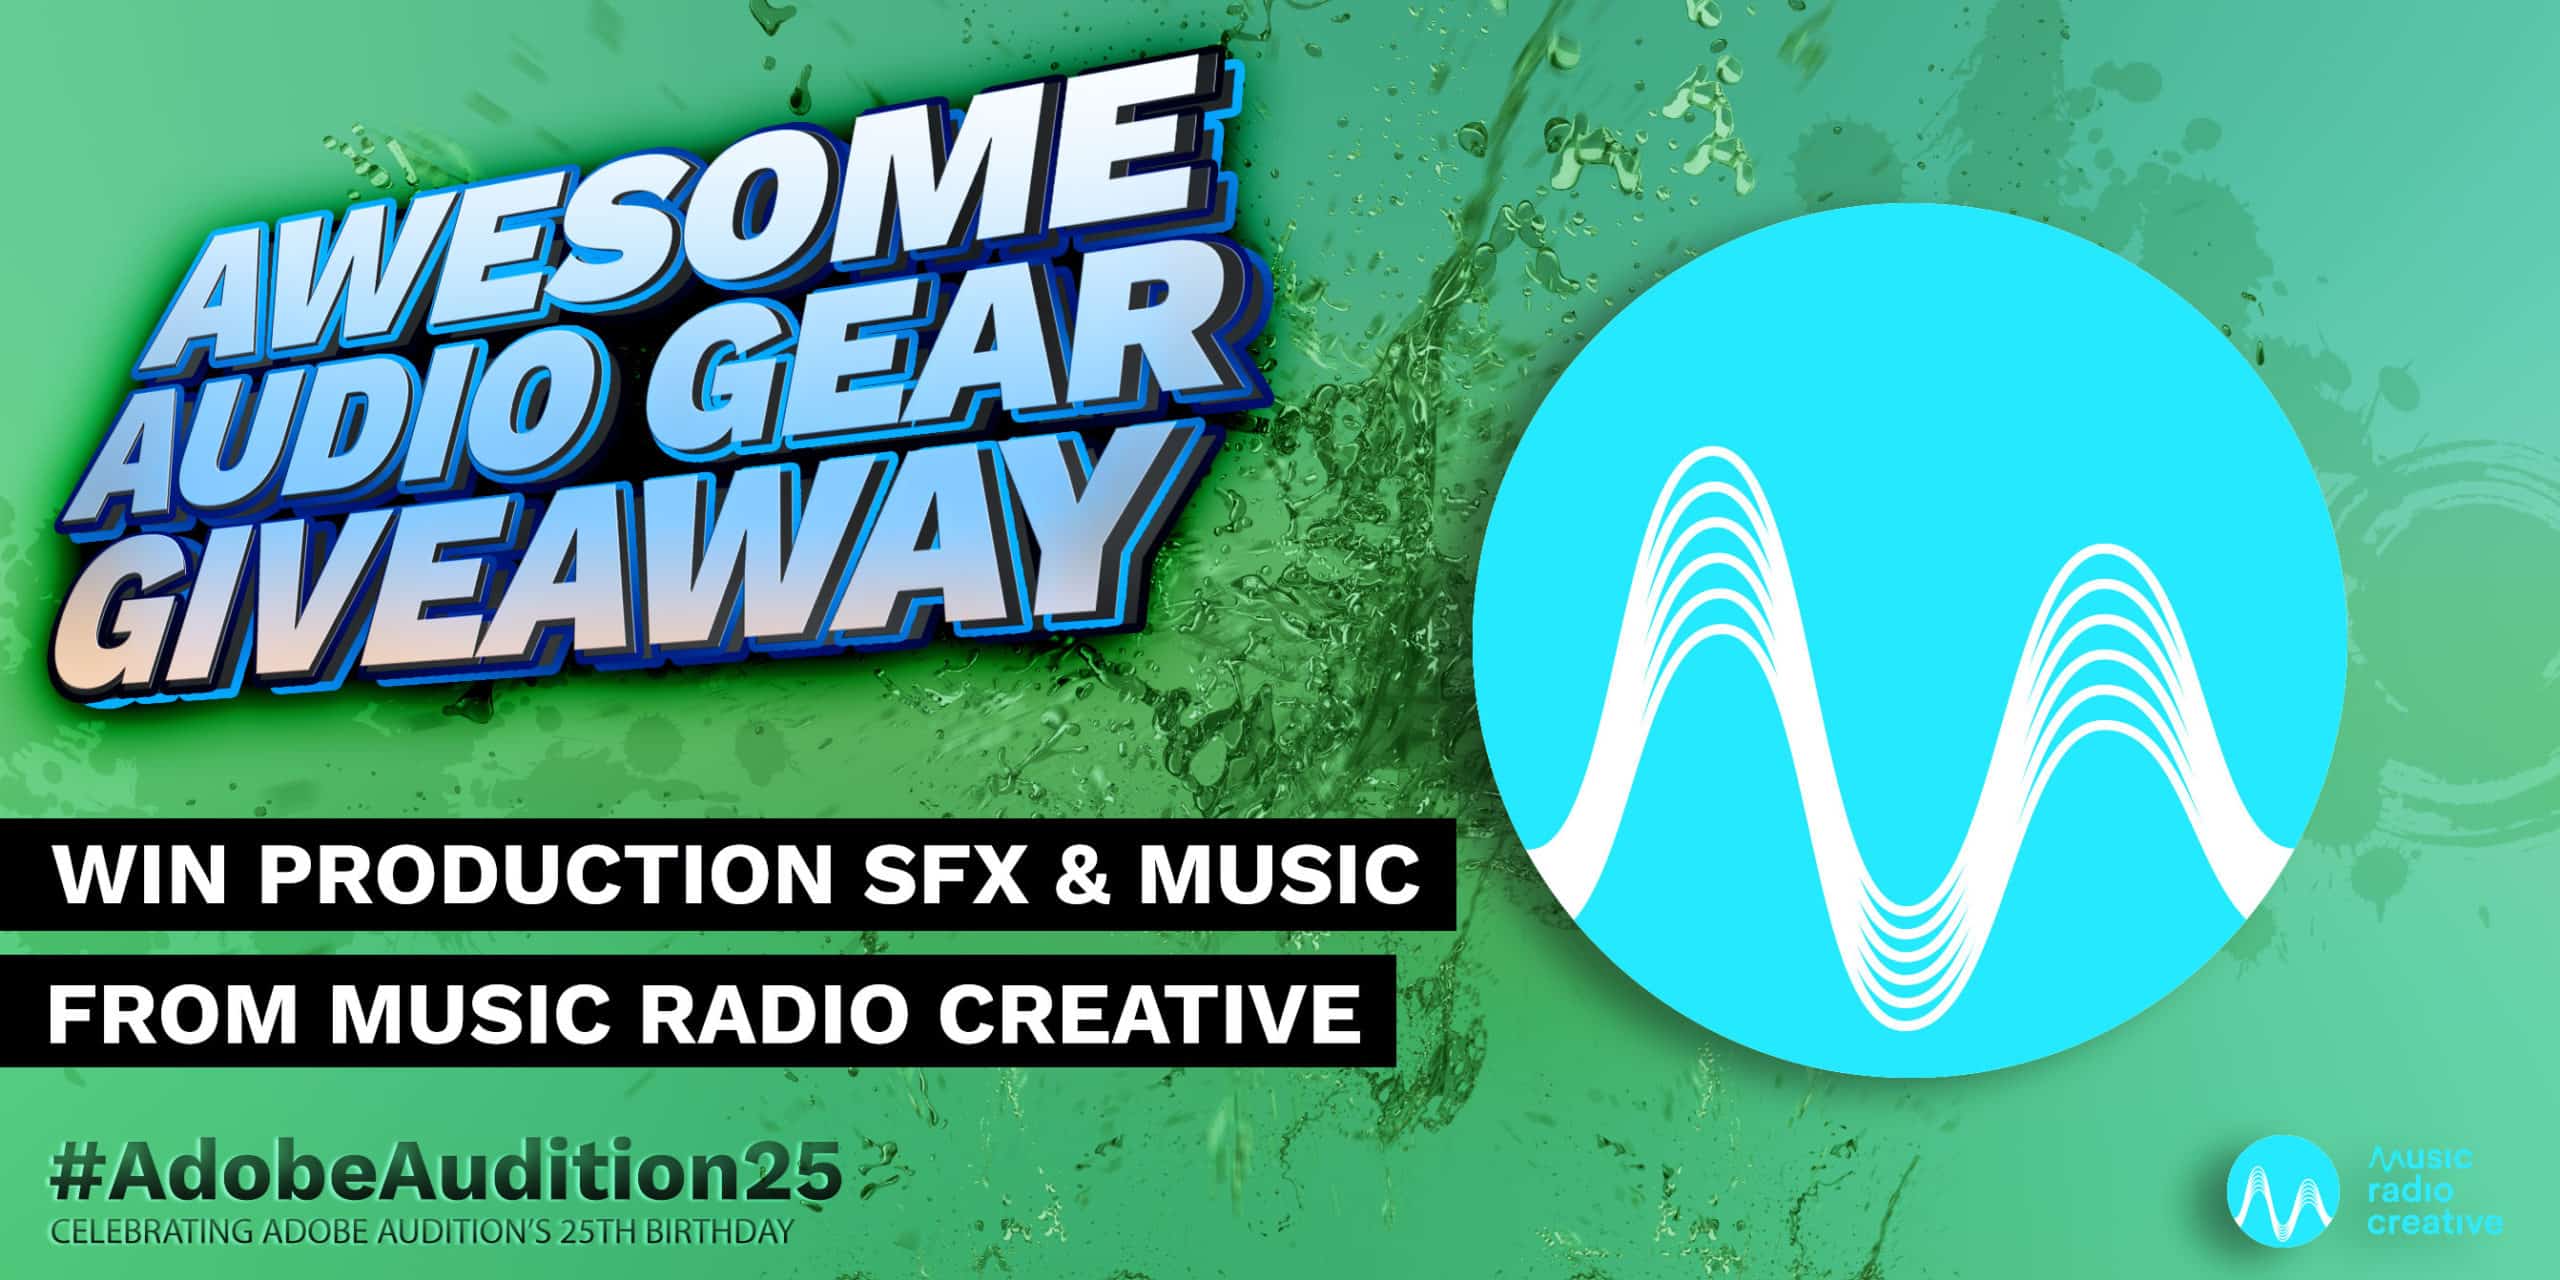 Win Production SFX & Music from Music Radio Creative Awesome Audio Gear Giveaway  Music Radio Creative